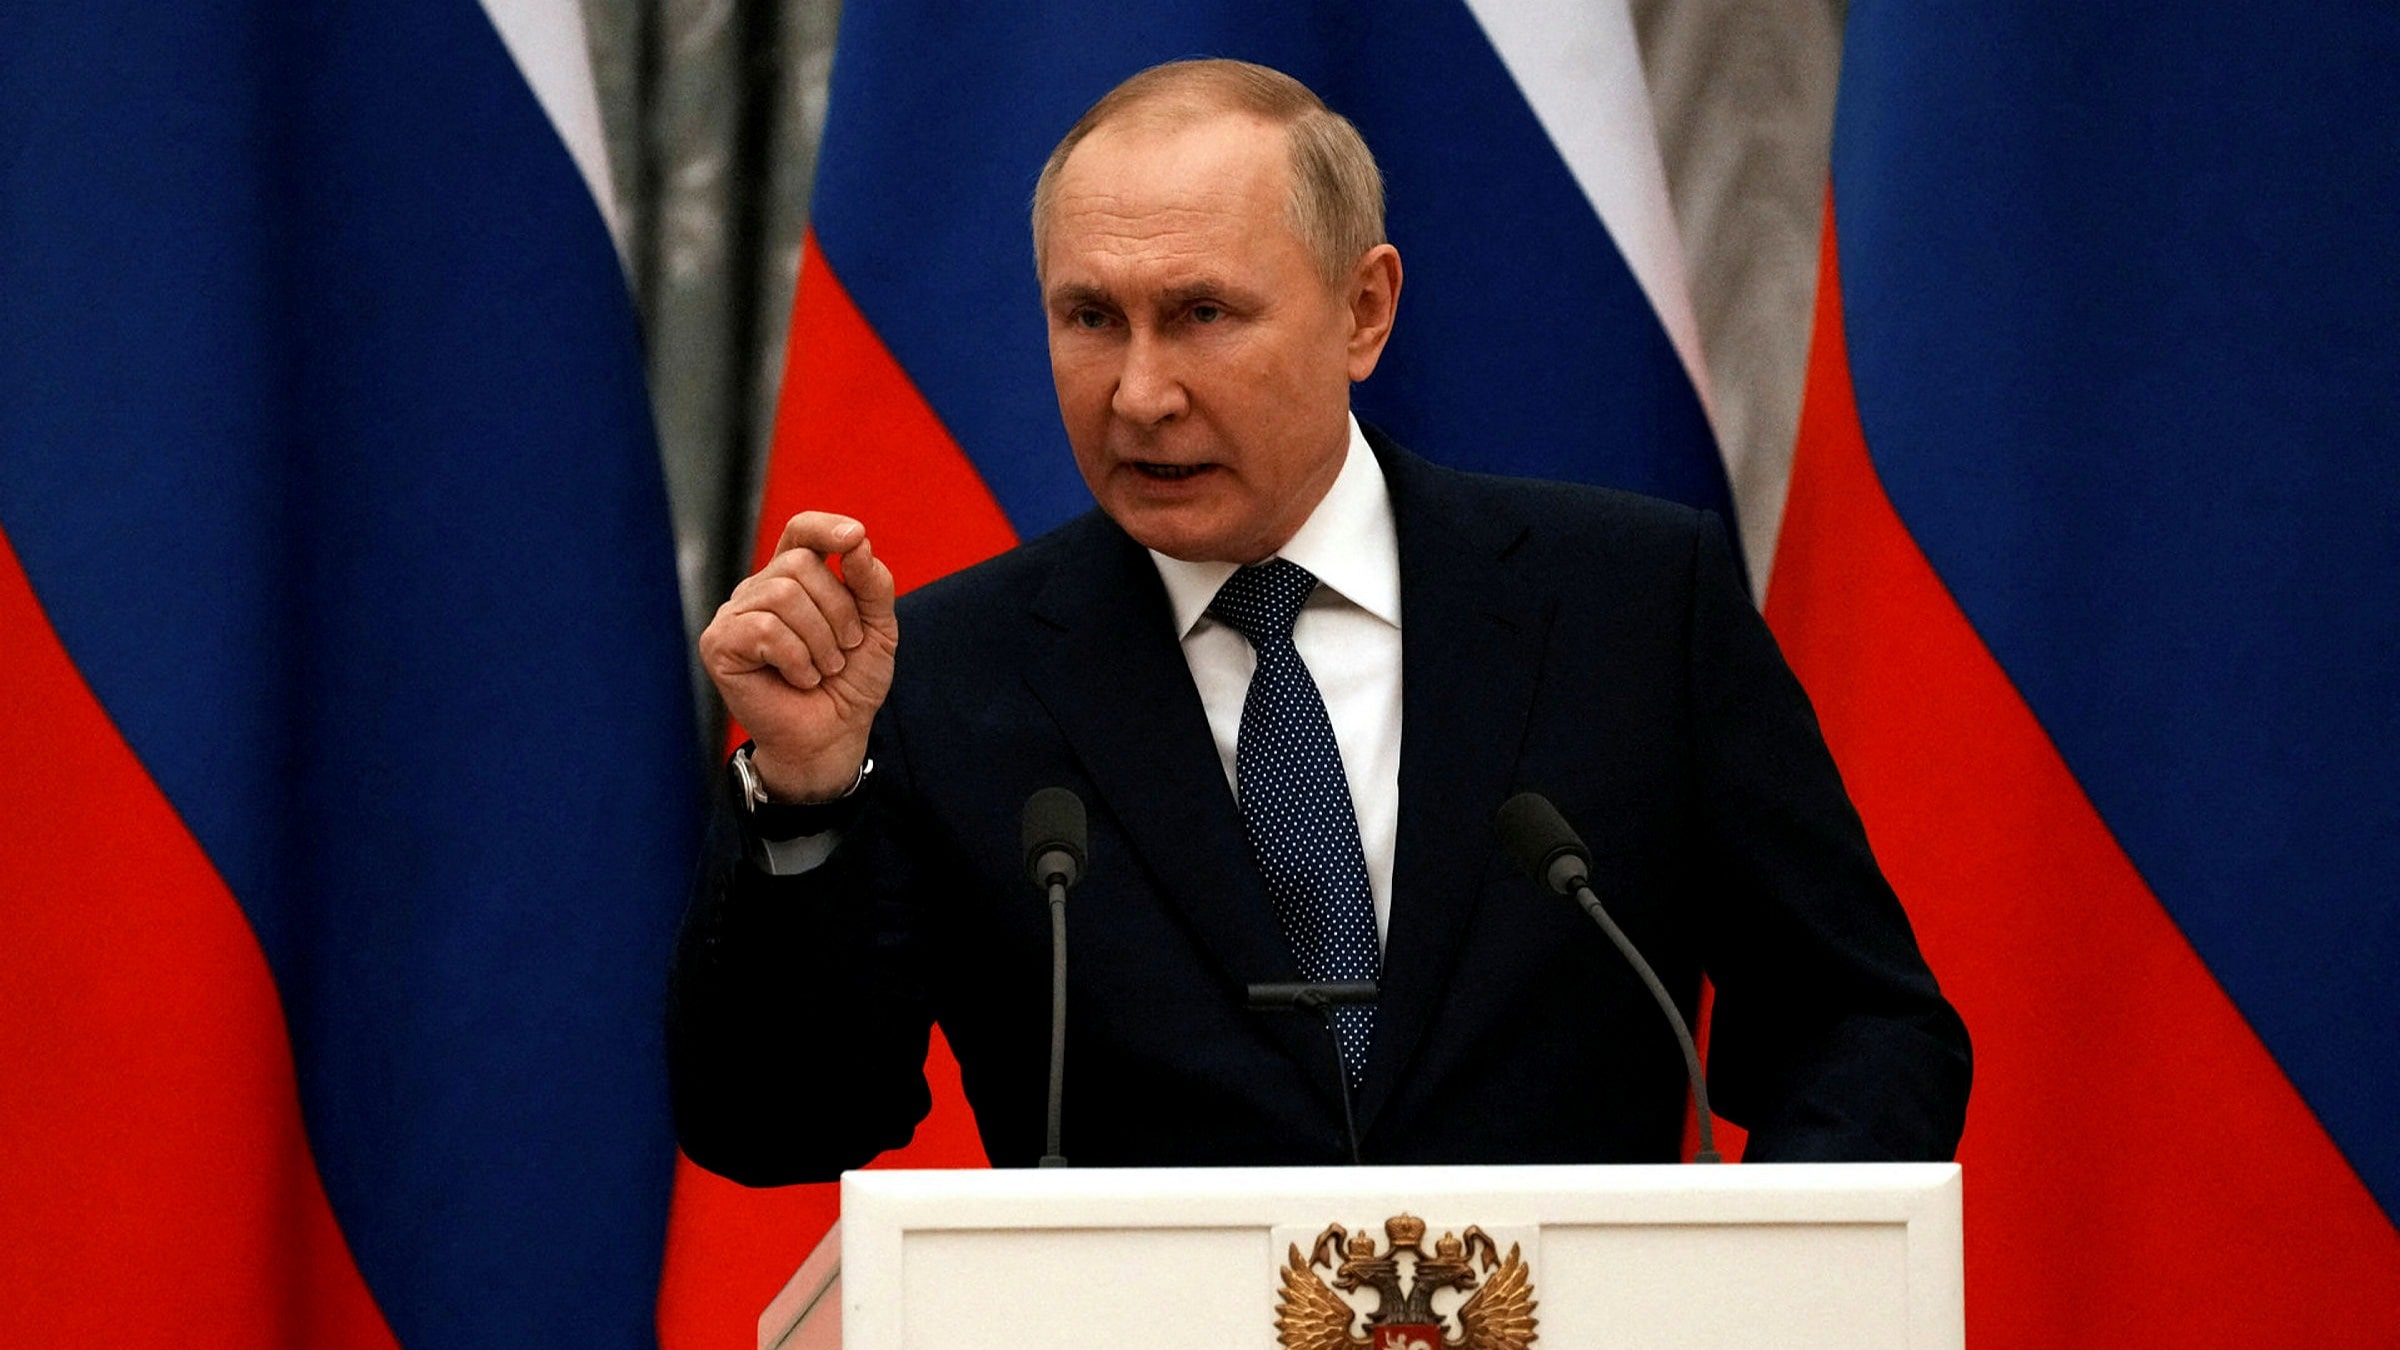 Putin bans Russians from leaving the country with $10,000+ foreign currency in hand